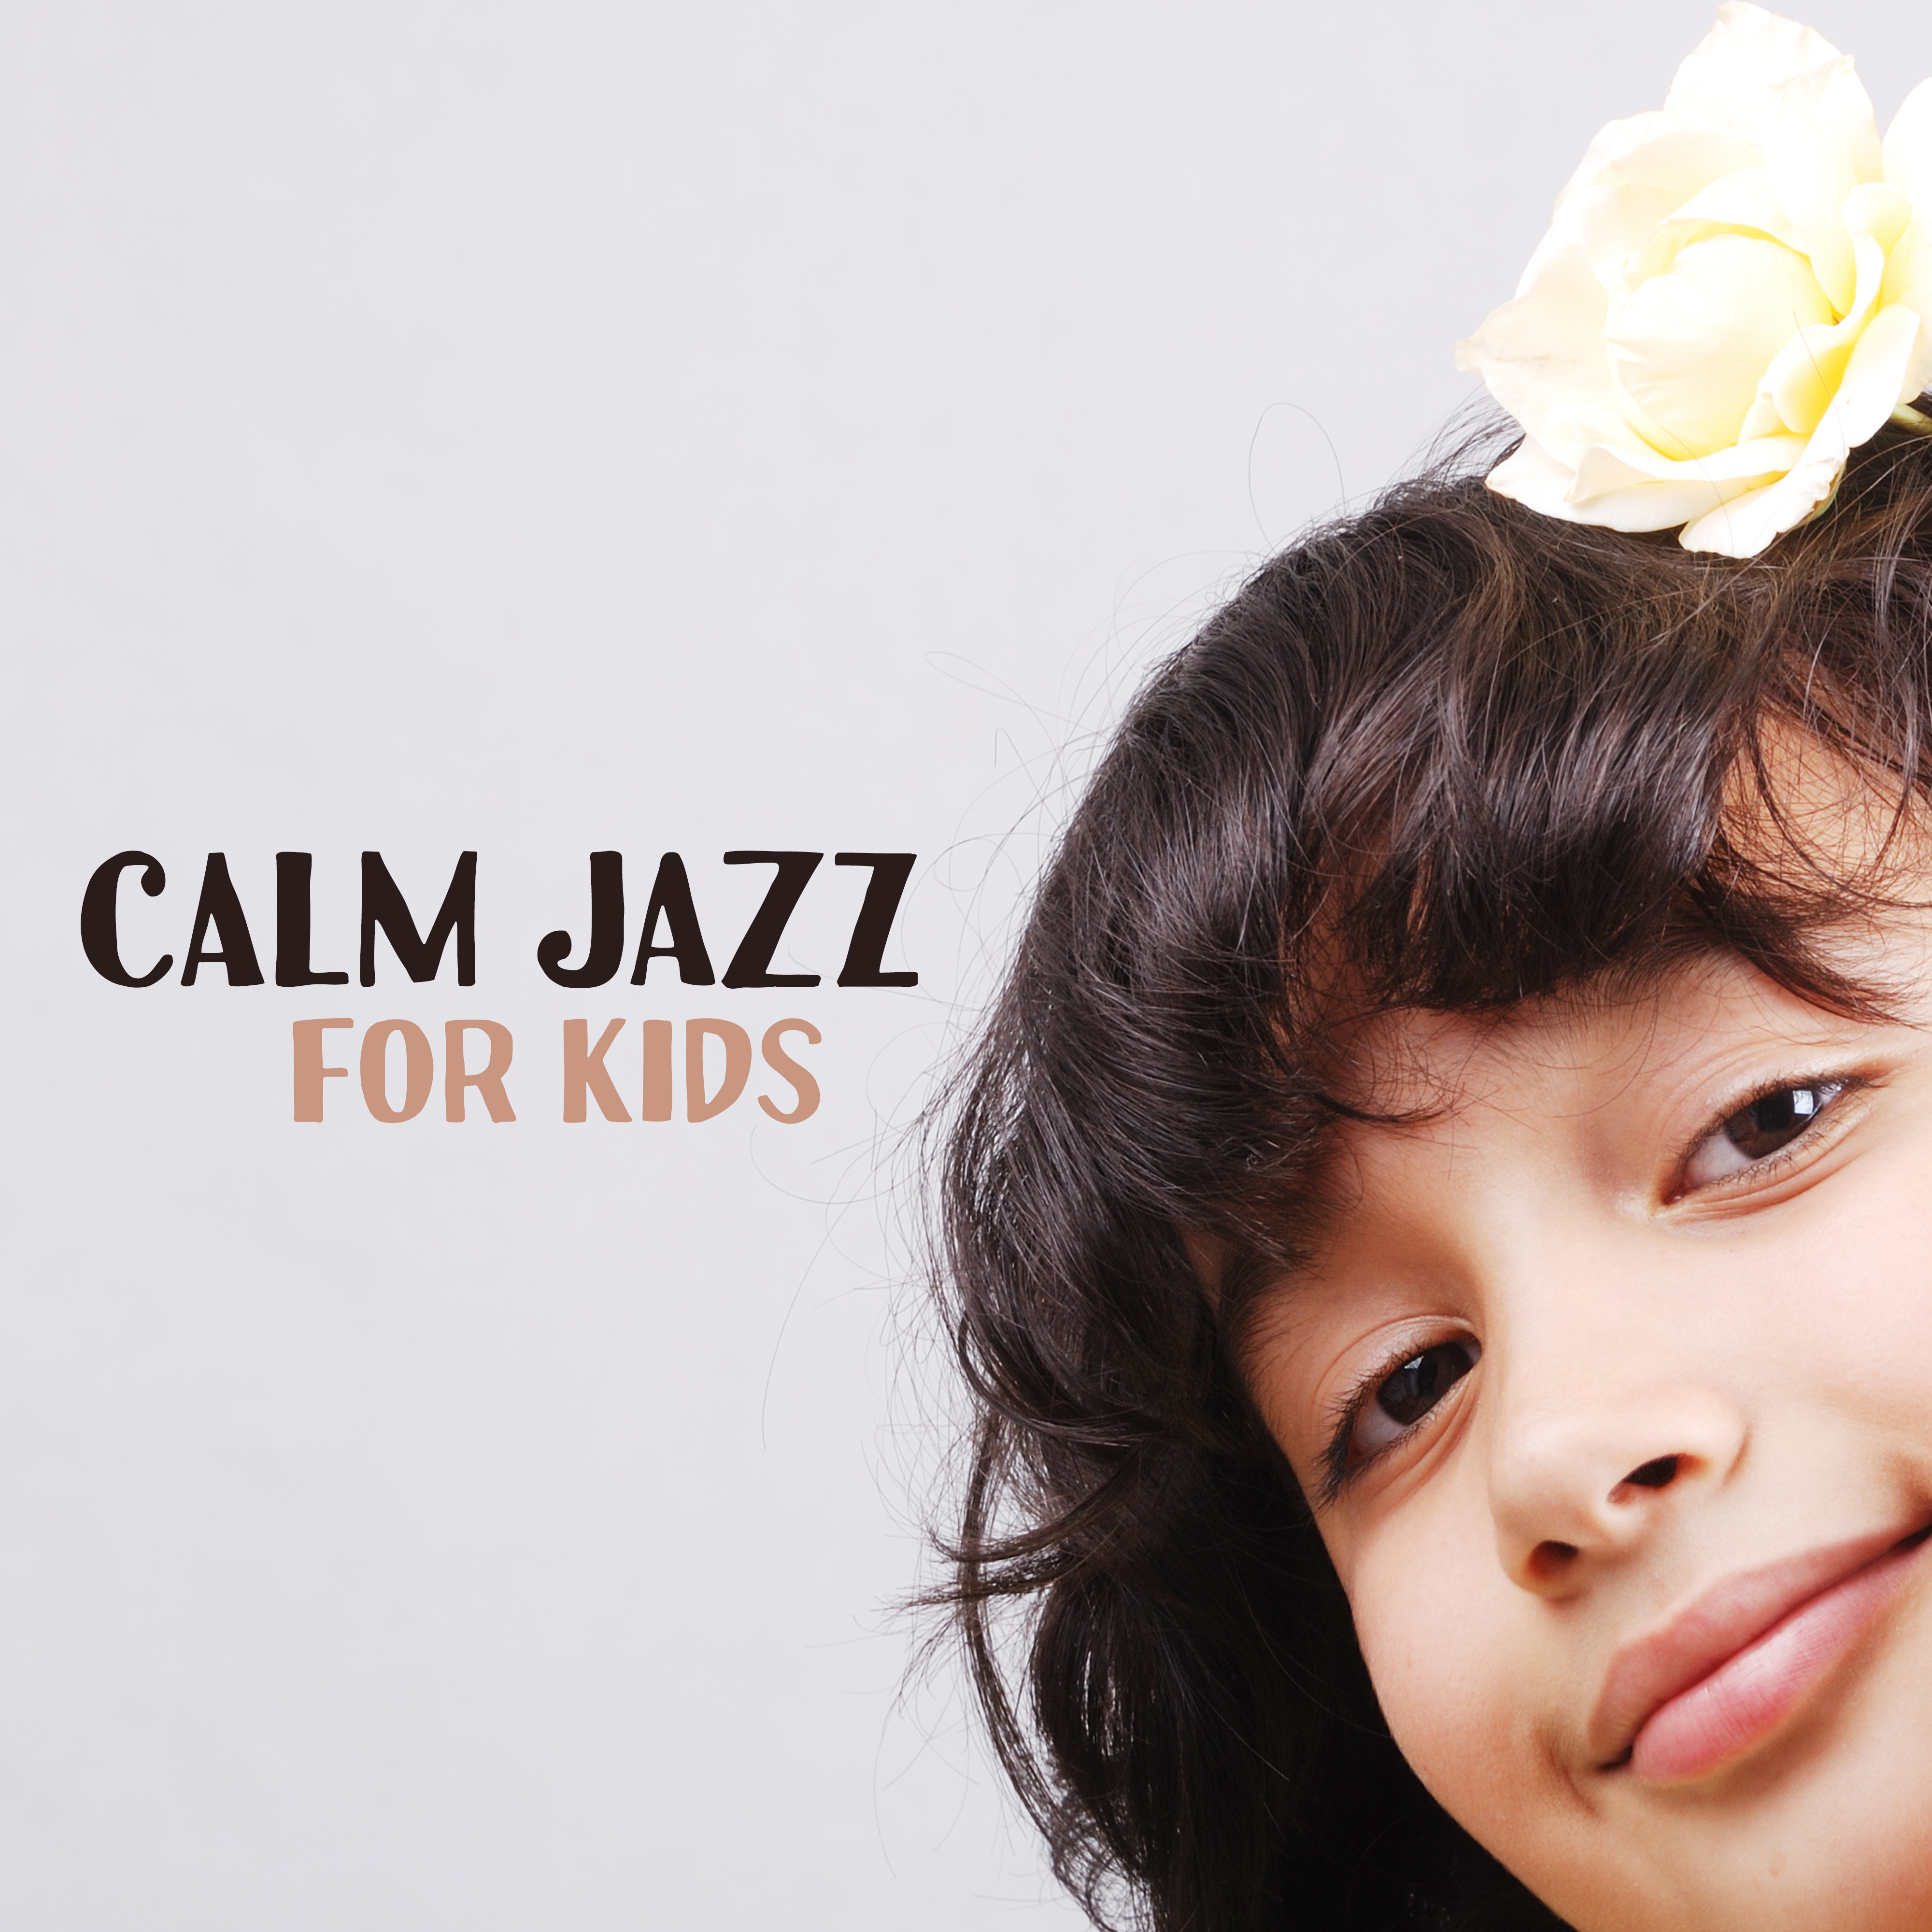 Calm Jazz for Kids – Bedtime Baby, Classical Jazz at Goodnight, Cradle Songs, Soothing Piano Music